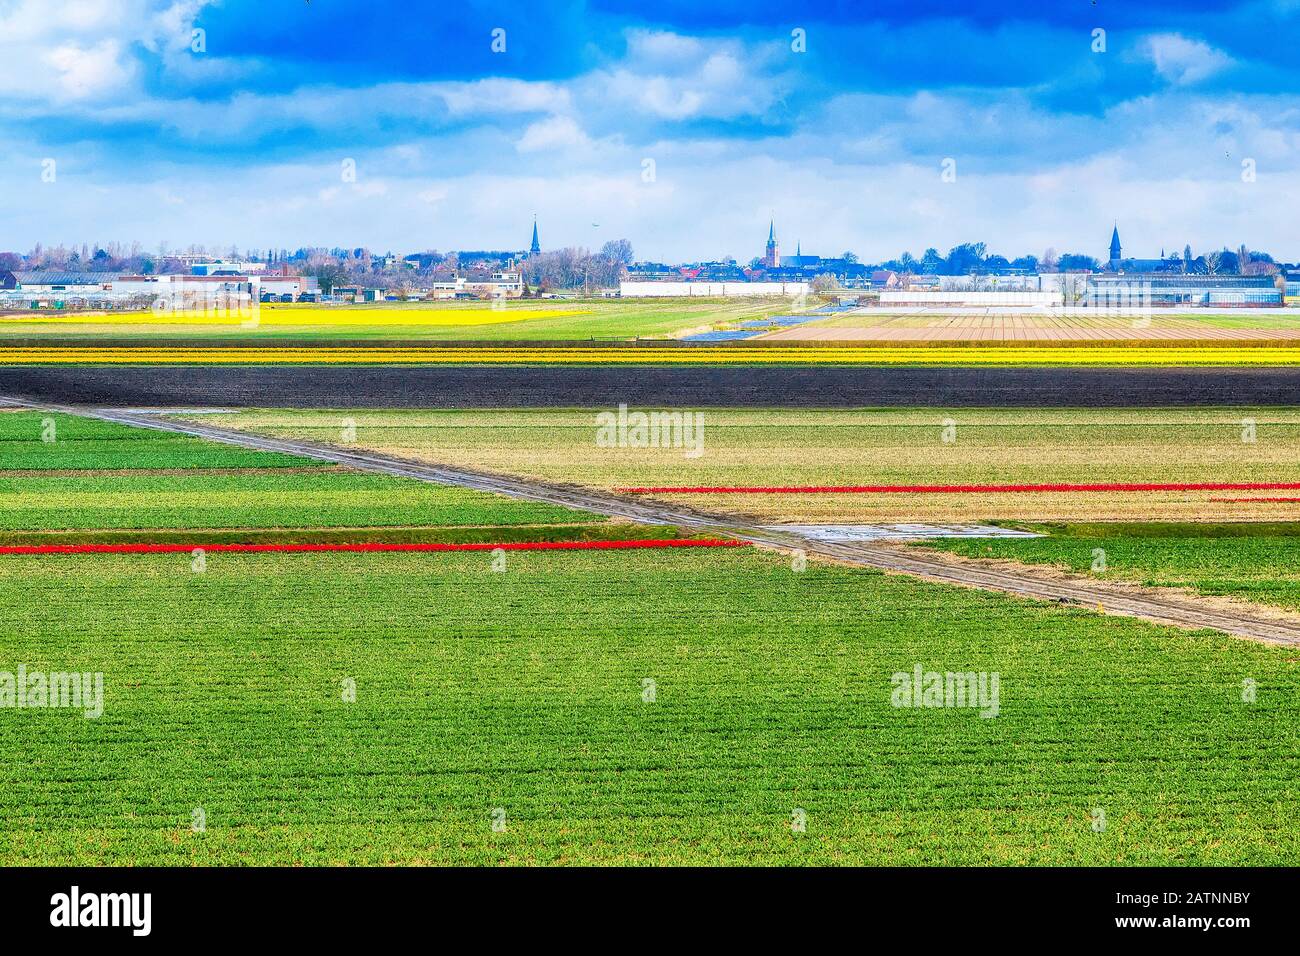 Holland Netherlands colorful landscape with flower fields rows aerial view, blue cloudy sky near Lisse Stock Photo